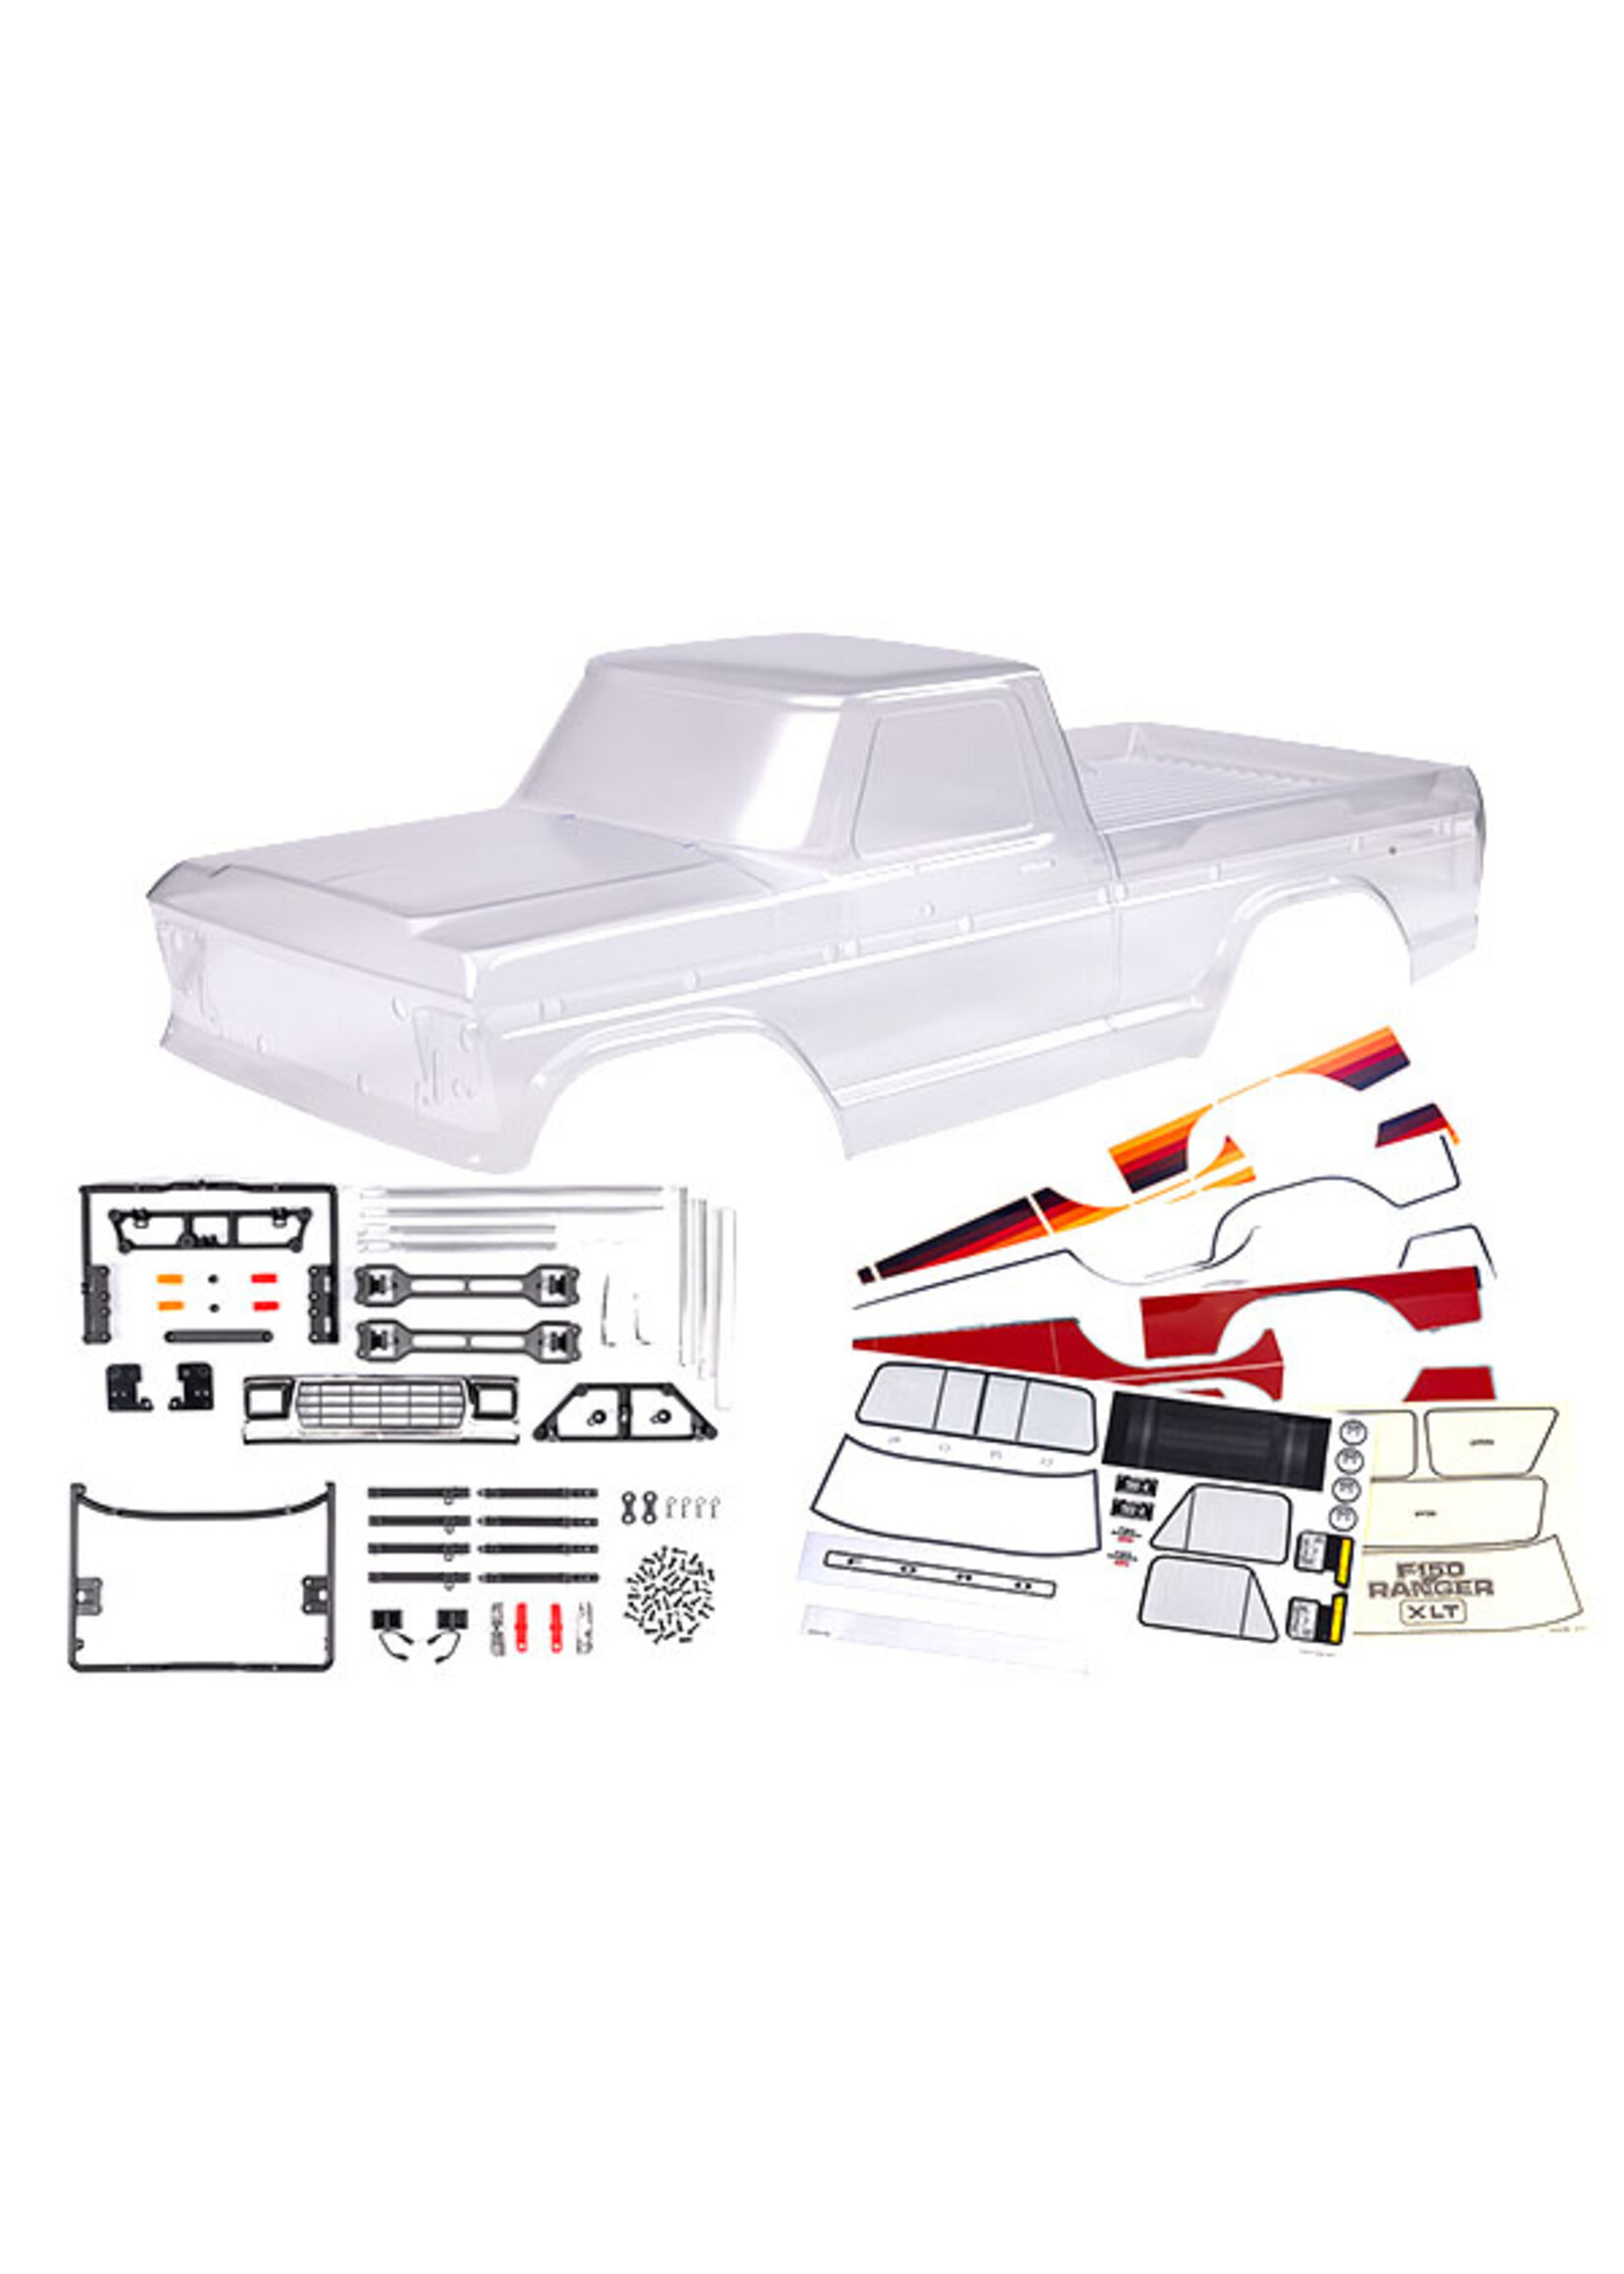 Traxxas 9230 - Trx-4 F-150 Body With Decals - Clear